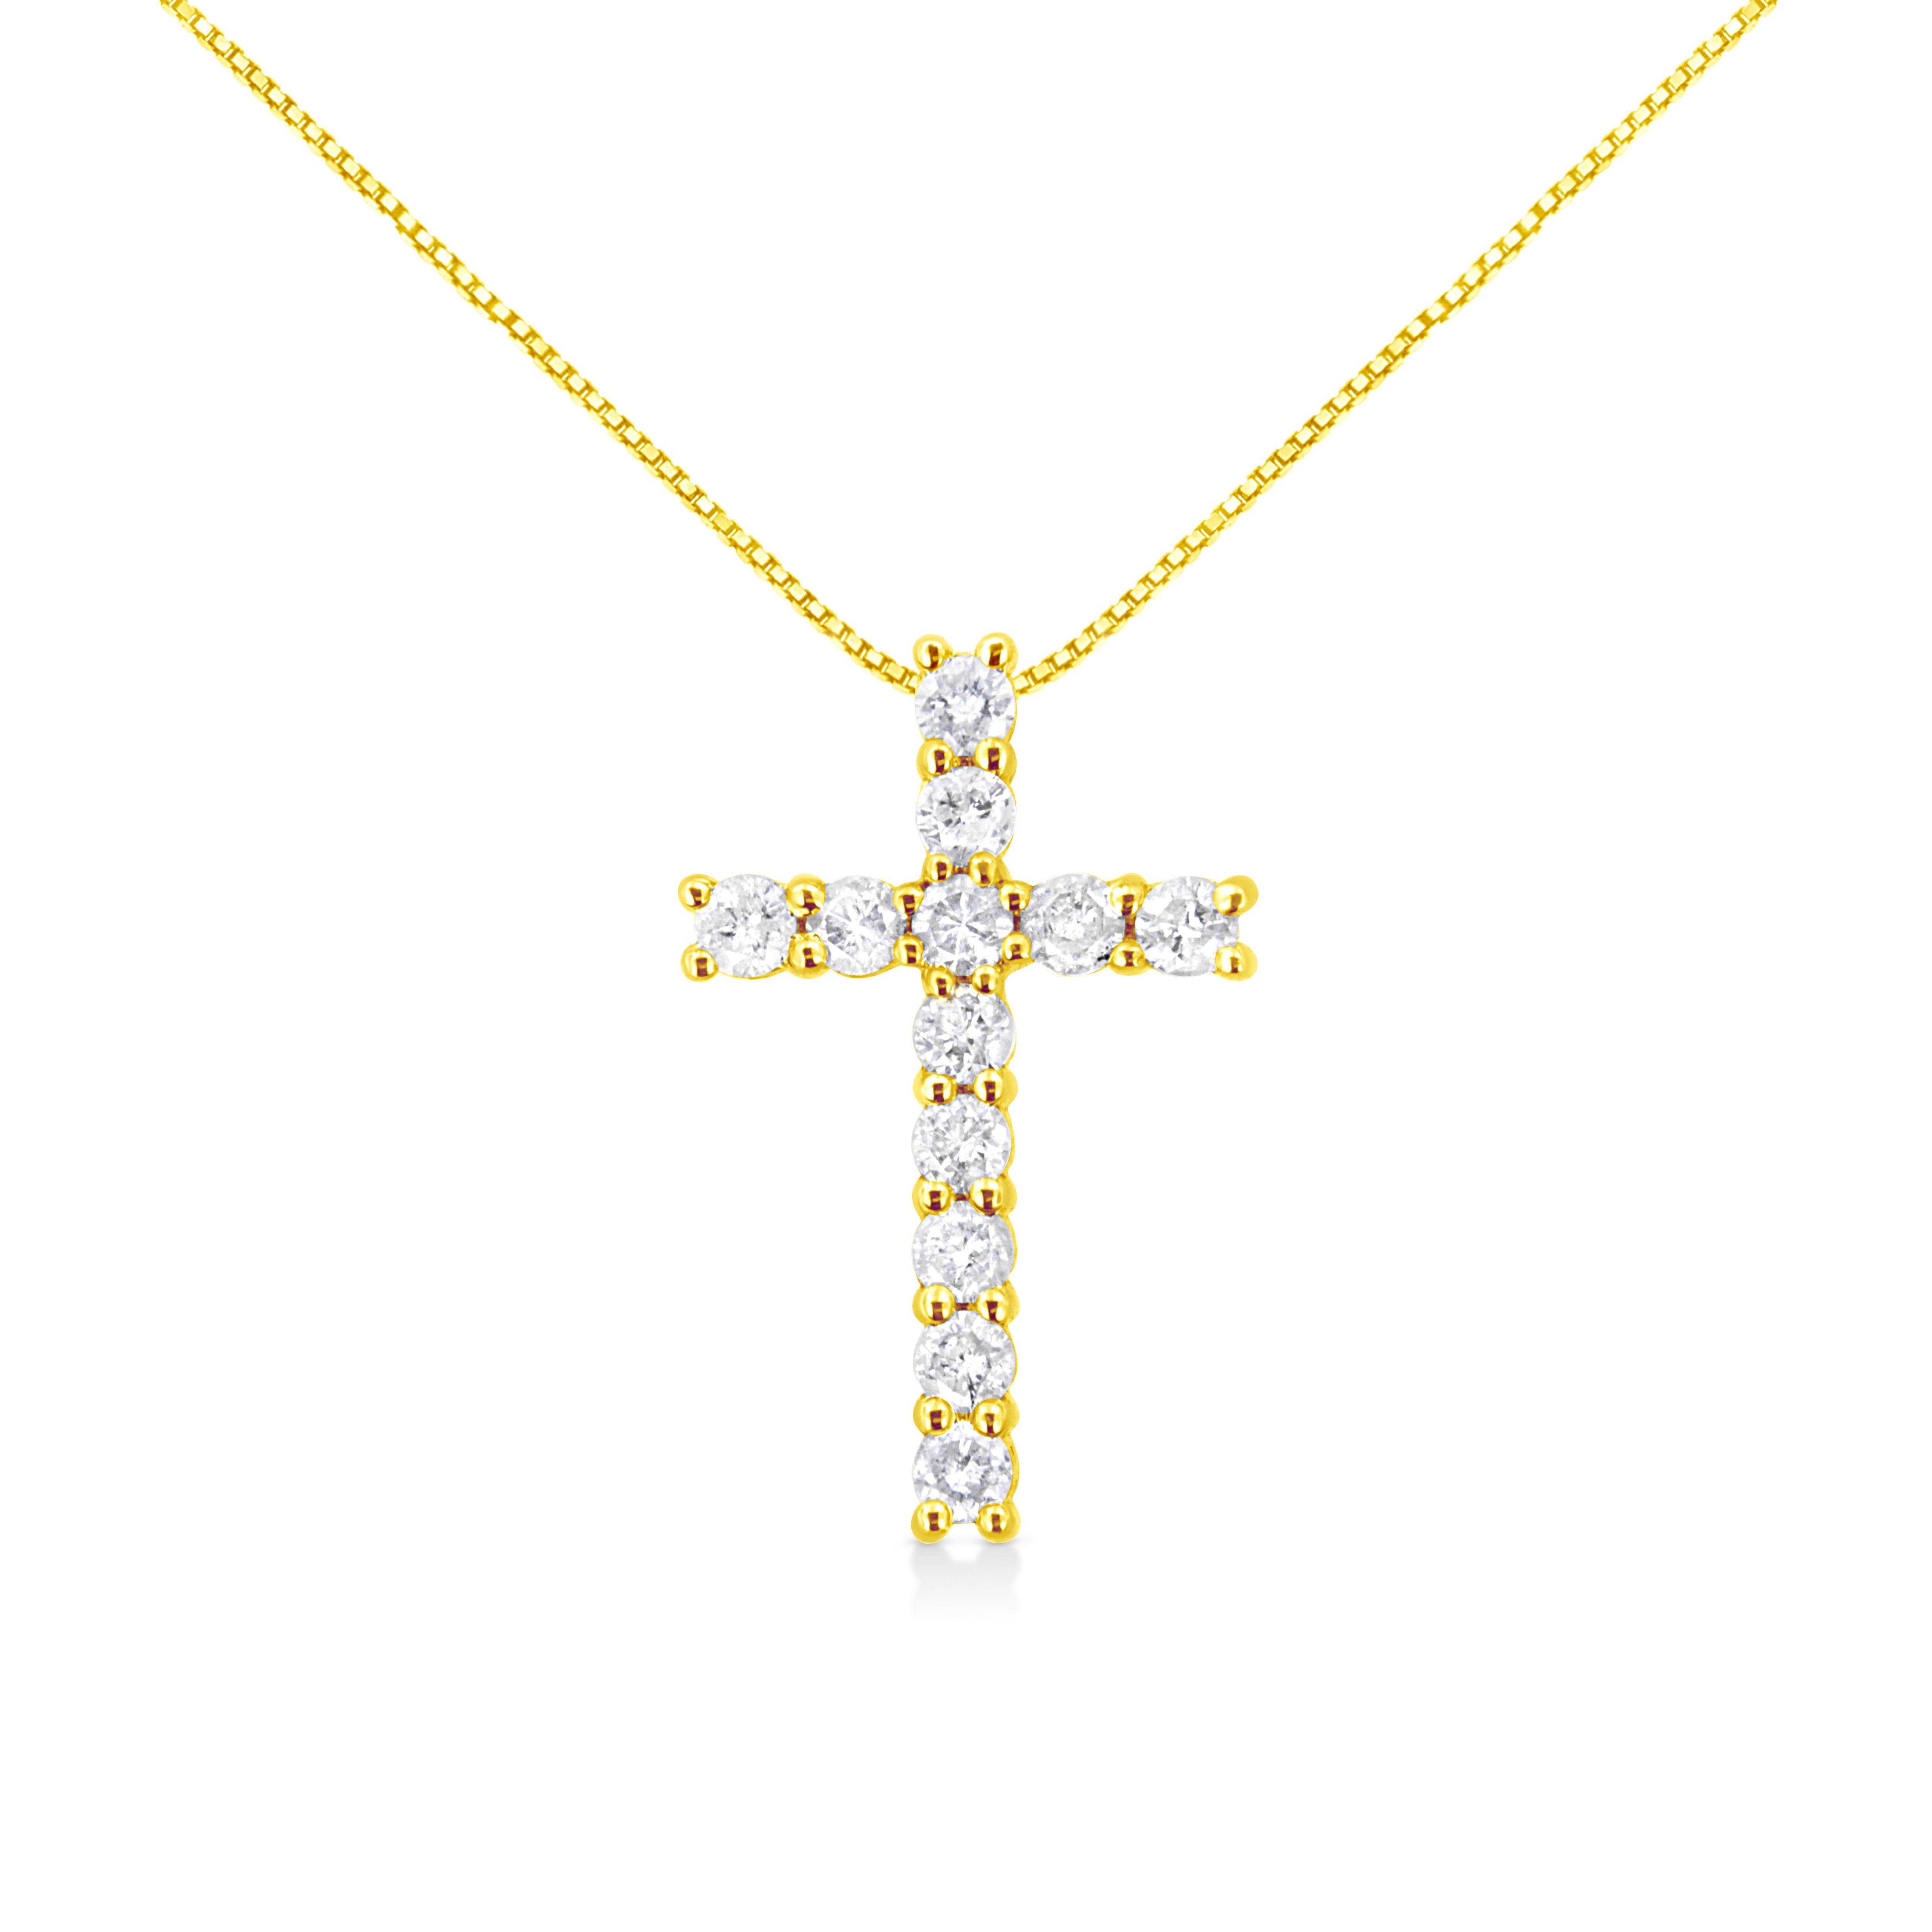 Faith meets fashion in this graceful diamond cross pendant. Crafted in warm 10k yellow gold plated .925 sterling silver, this feminine style crosses two single rows of shimmering prong-set diamonds to create an elegant design. Inspiring with 12